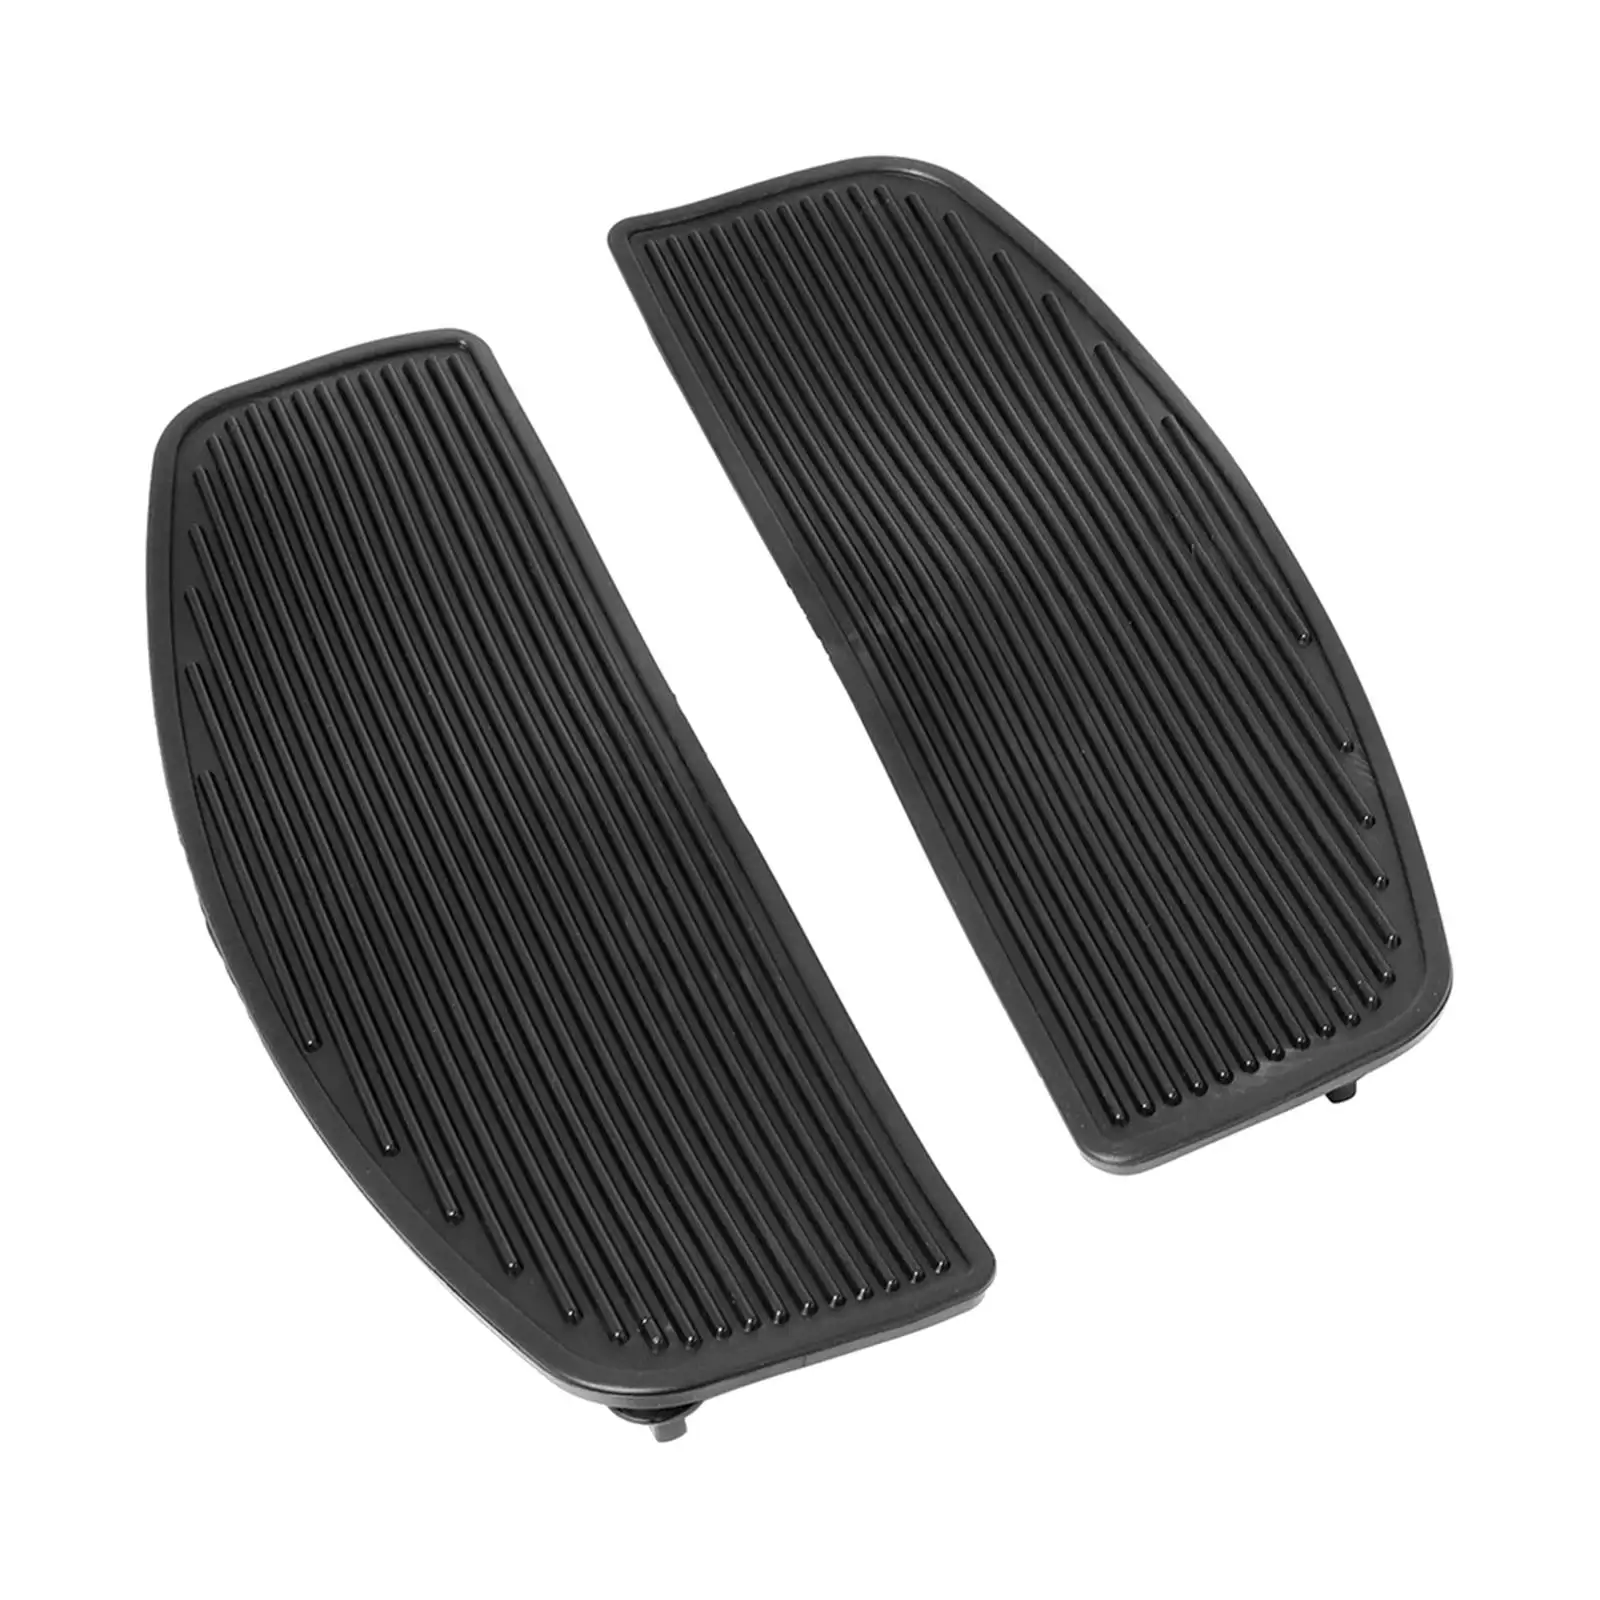 Motorcycle Pedals Driver Side Replacement, Footrest Pad High Performance